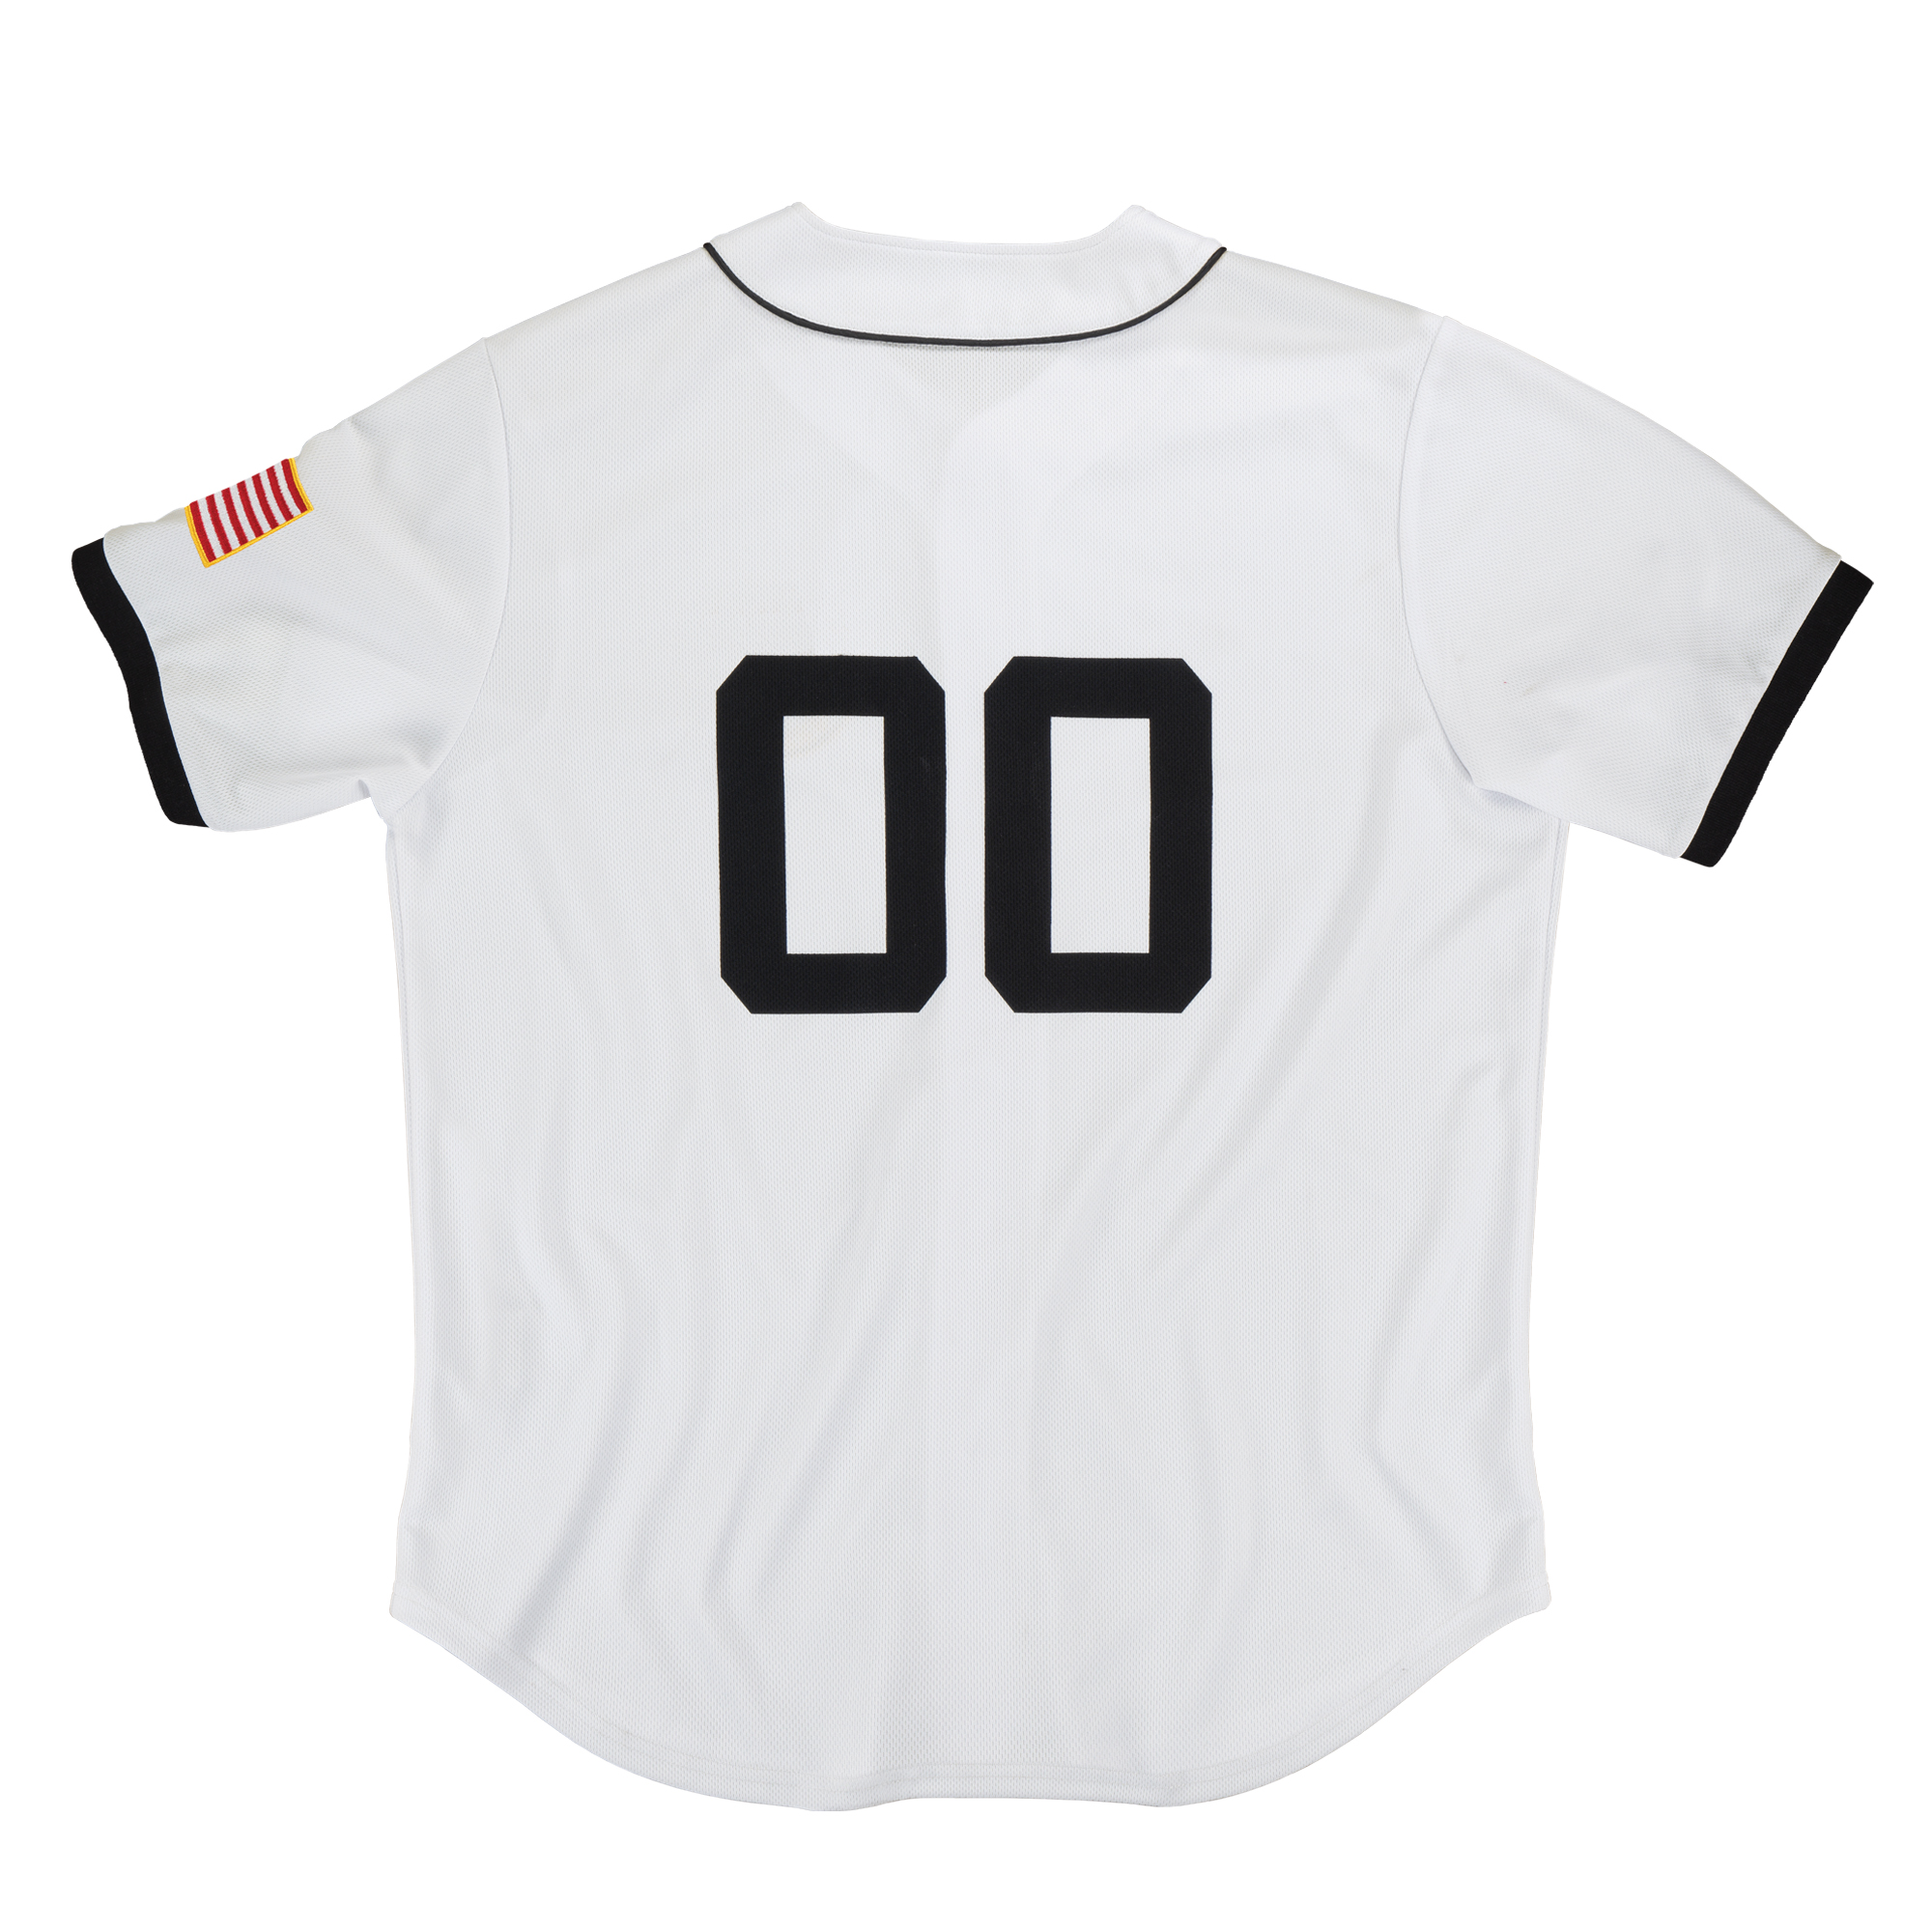 The Personalized US Navy Baseball Jersey 10650 0028 a main